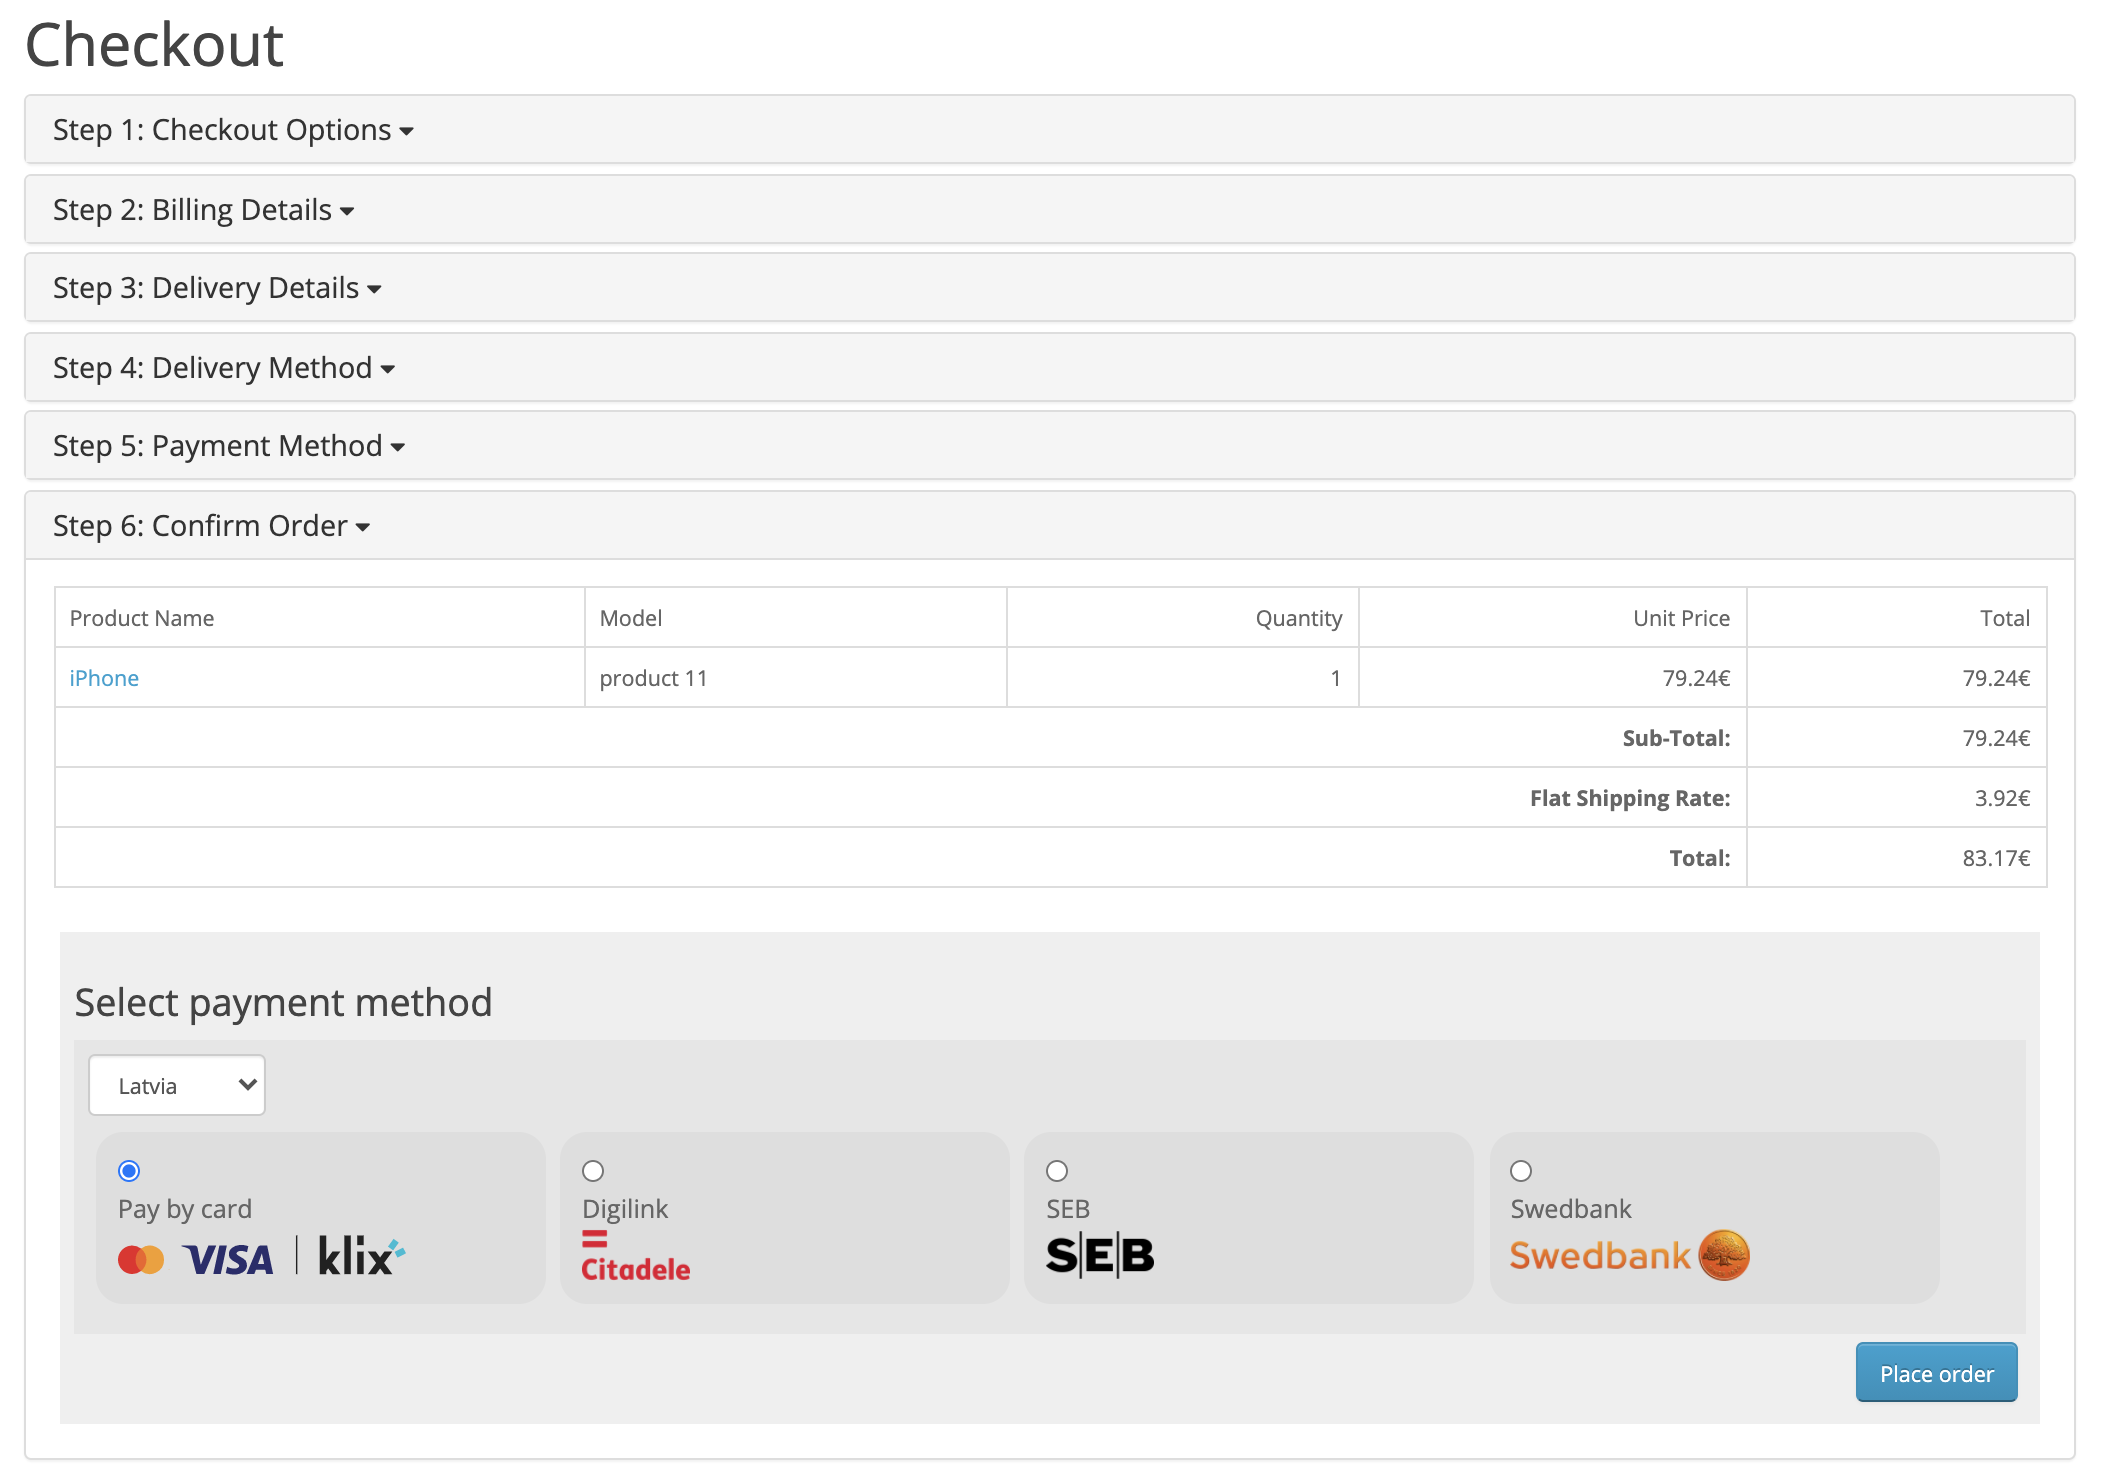 Checkout payment method selection screen